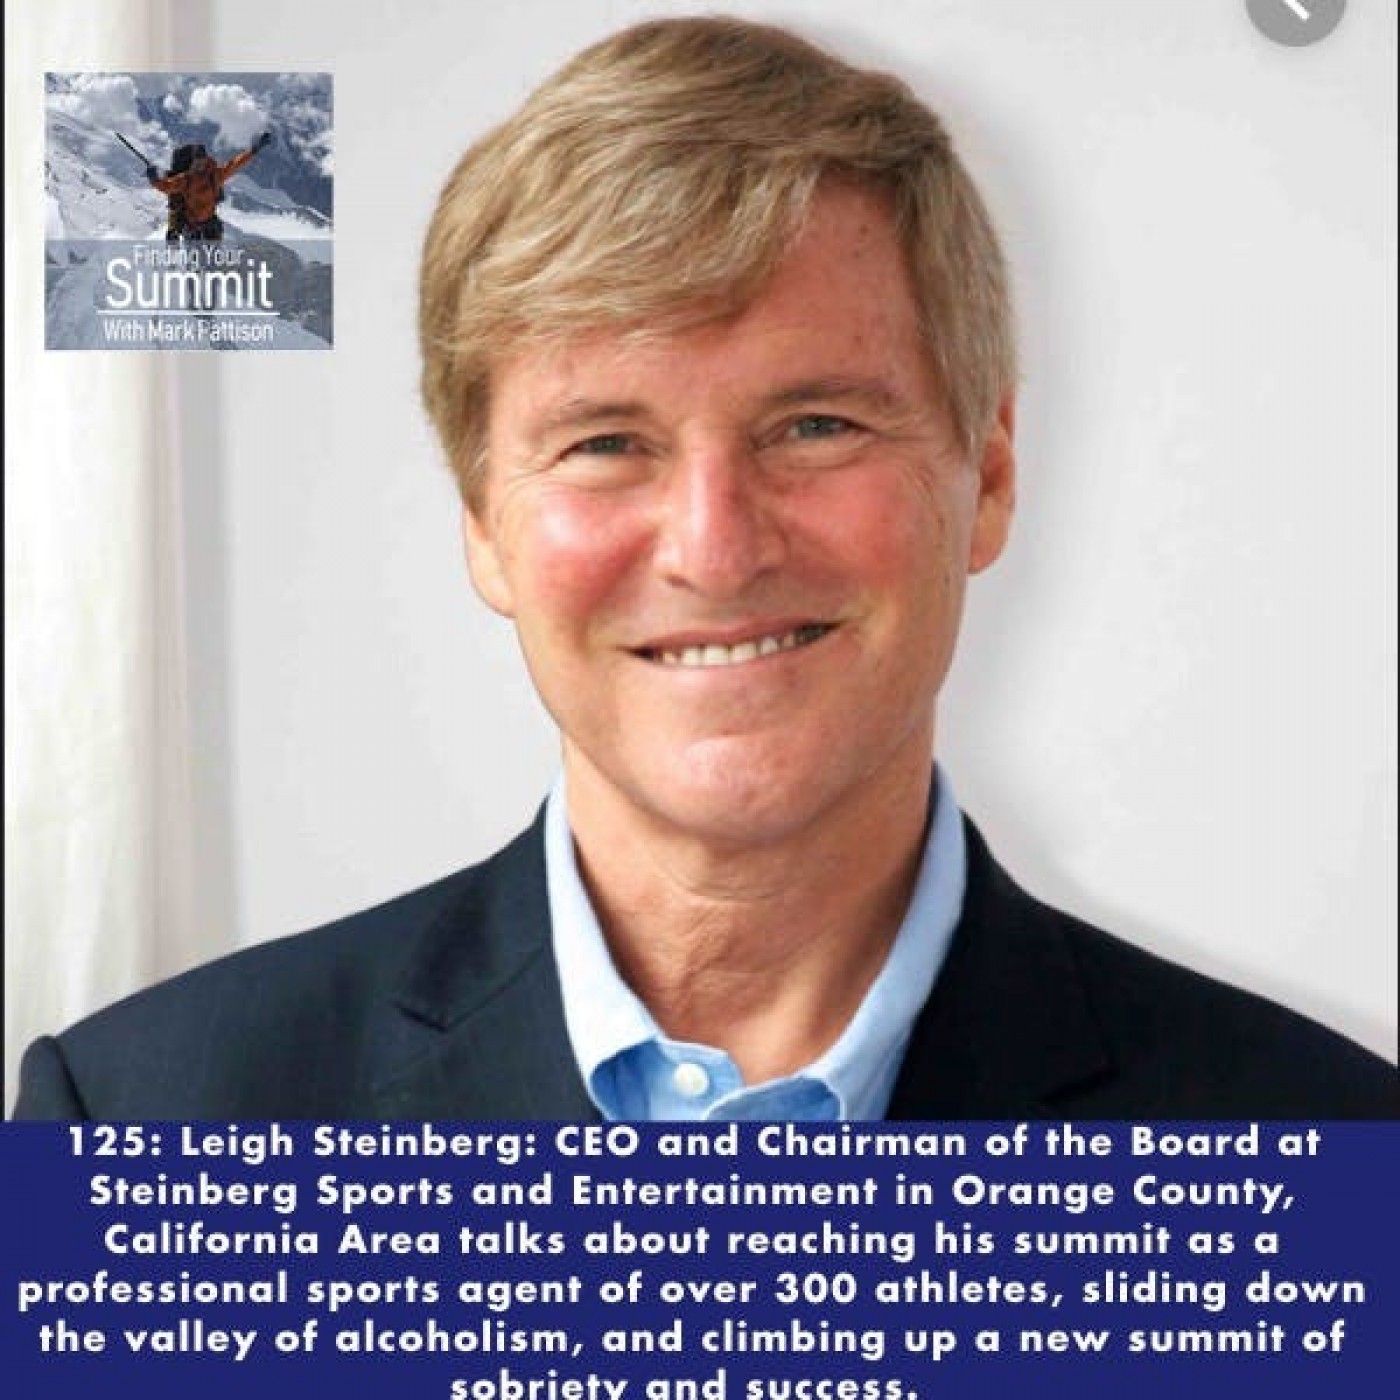 Leigh Steinberg: CEO and Chairman of the Board at Steinberg Sports and Entertainment in Orange County, California Area talks about reaching